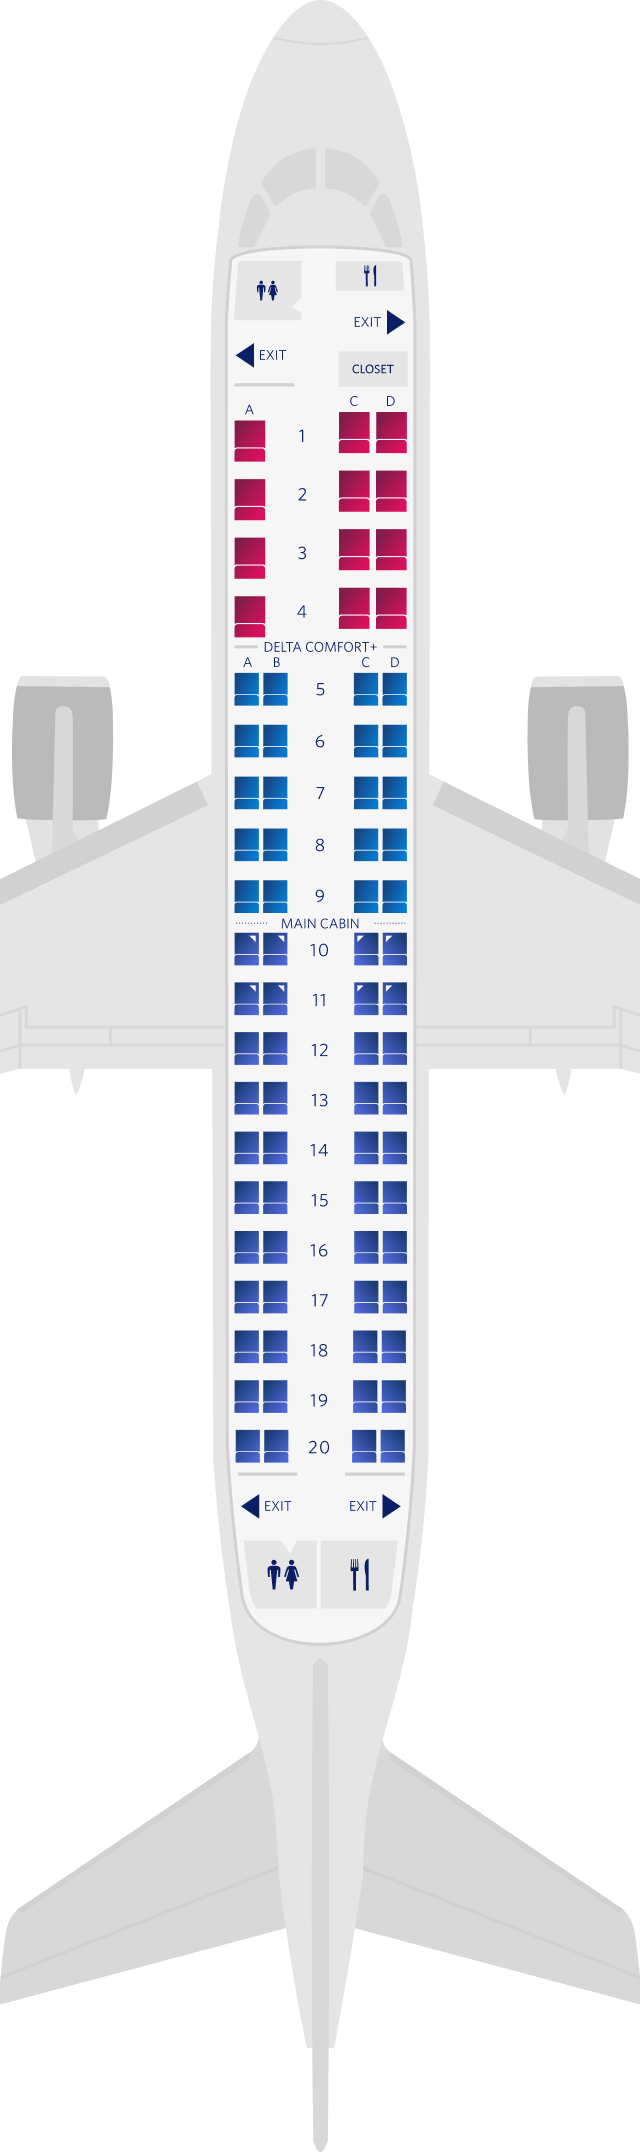 Delta Embraer Emb 175 Jet Seating Chart Two Birds Home